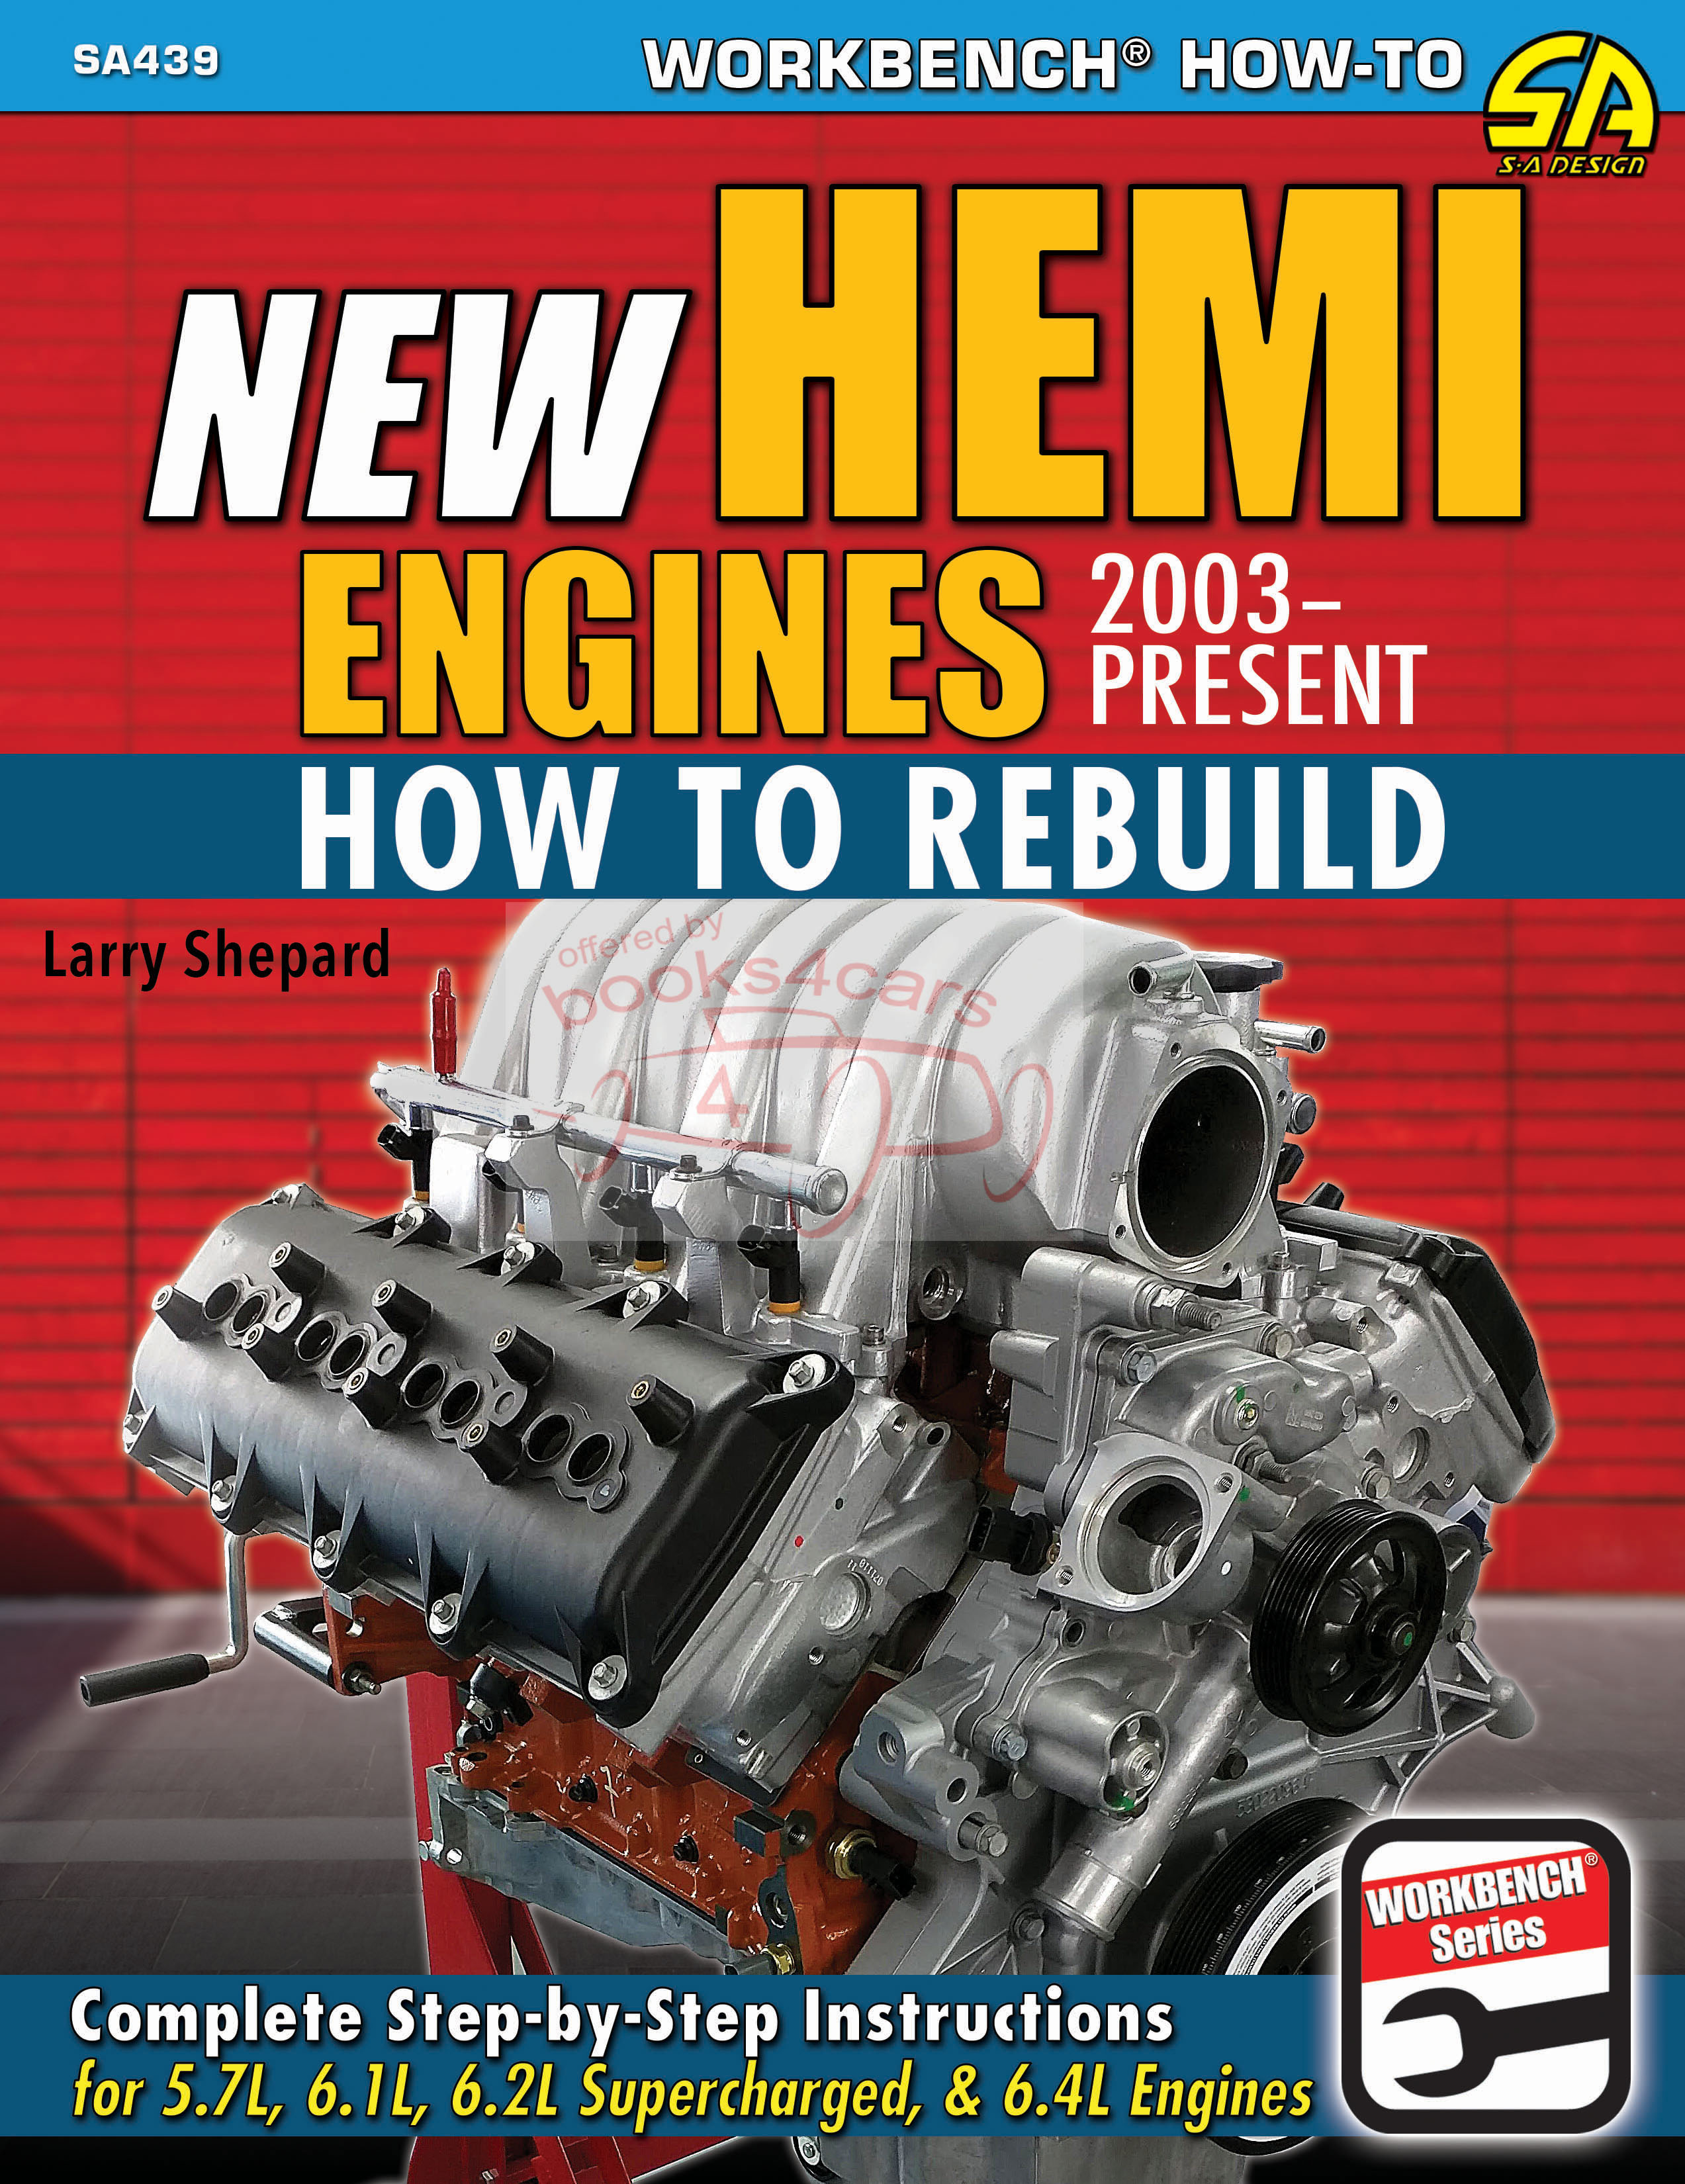 03-18 How to Rebuild New Hemi Engines by L Shepard 144 pages with step by step instructions for 5.7L 6.1L 6.2L Supercharged & 6.4L engines